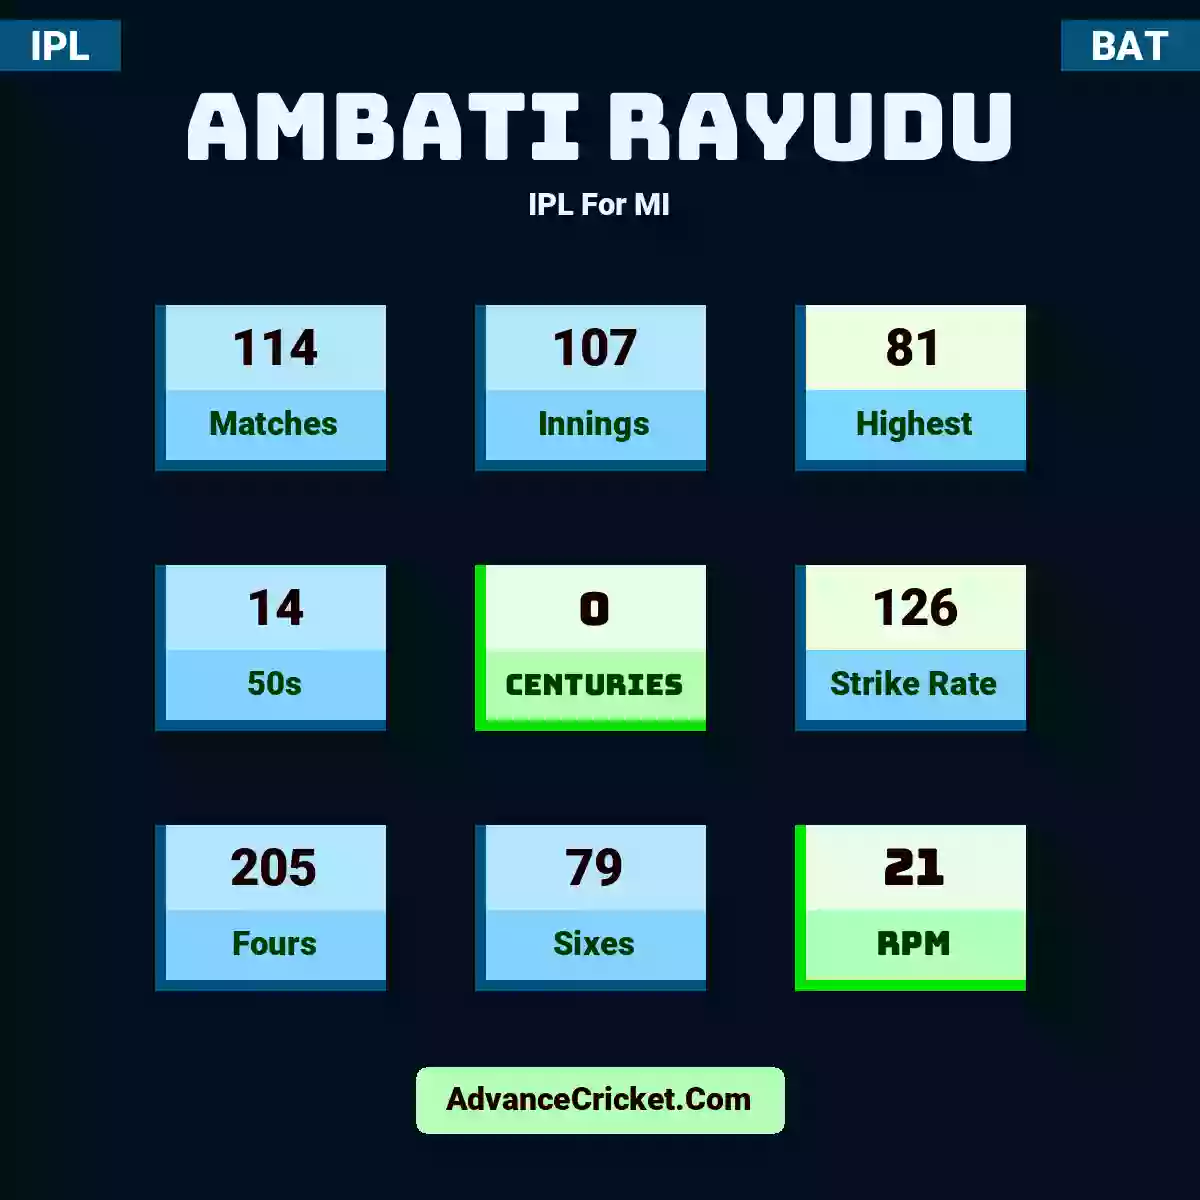 Ambati Rayudu IPL  For MI, Ambati Rayudu played 114 matches, scored 81 runs as highest, 14 half-centuries, and 0 centuries, with a strike rate of 126. A.Rayudu hit 205 fours and 79 sixes, with an RPM of 21.